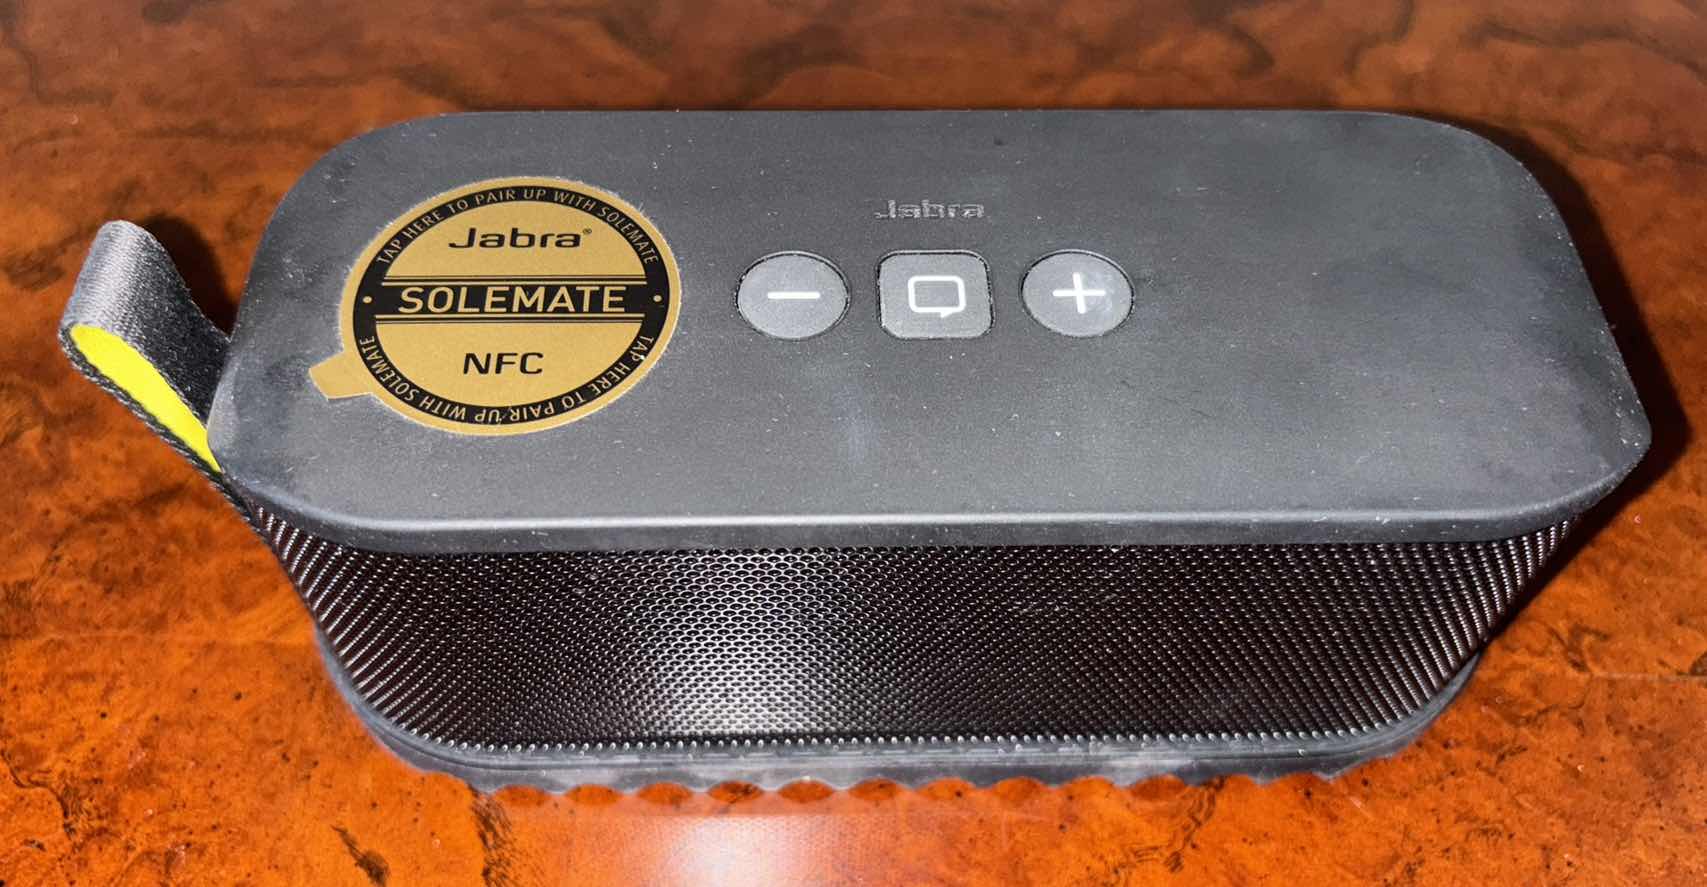 Photo 2 of JABRA ‘SOLEMATE’ BLUETOOTH SPEAKER W USB CORD & AC/DC ADAPTER W USB CAR CHARGER